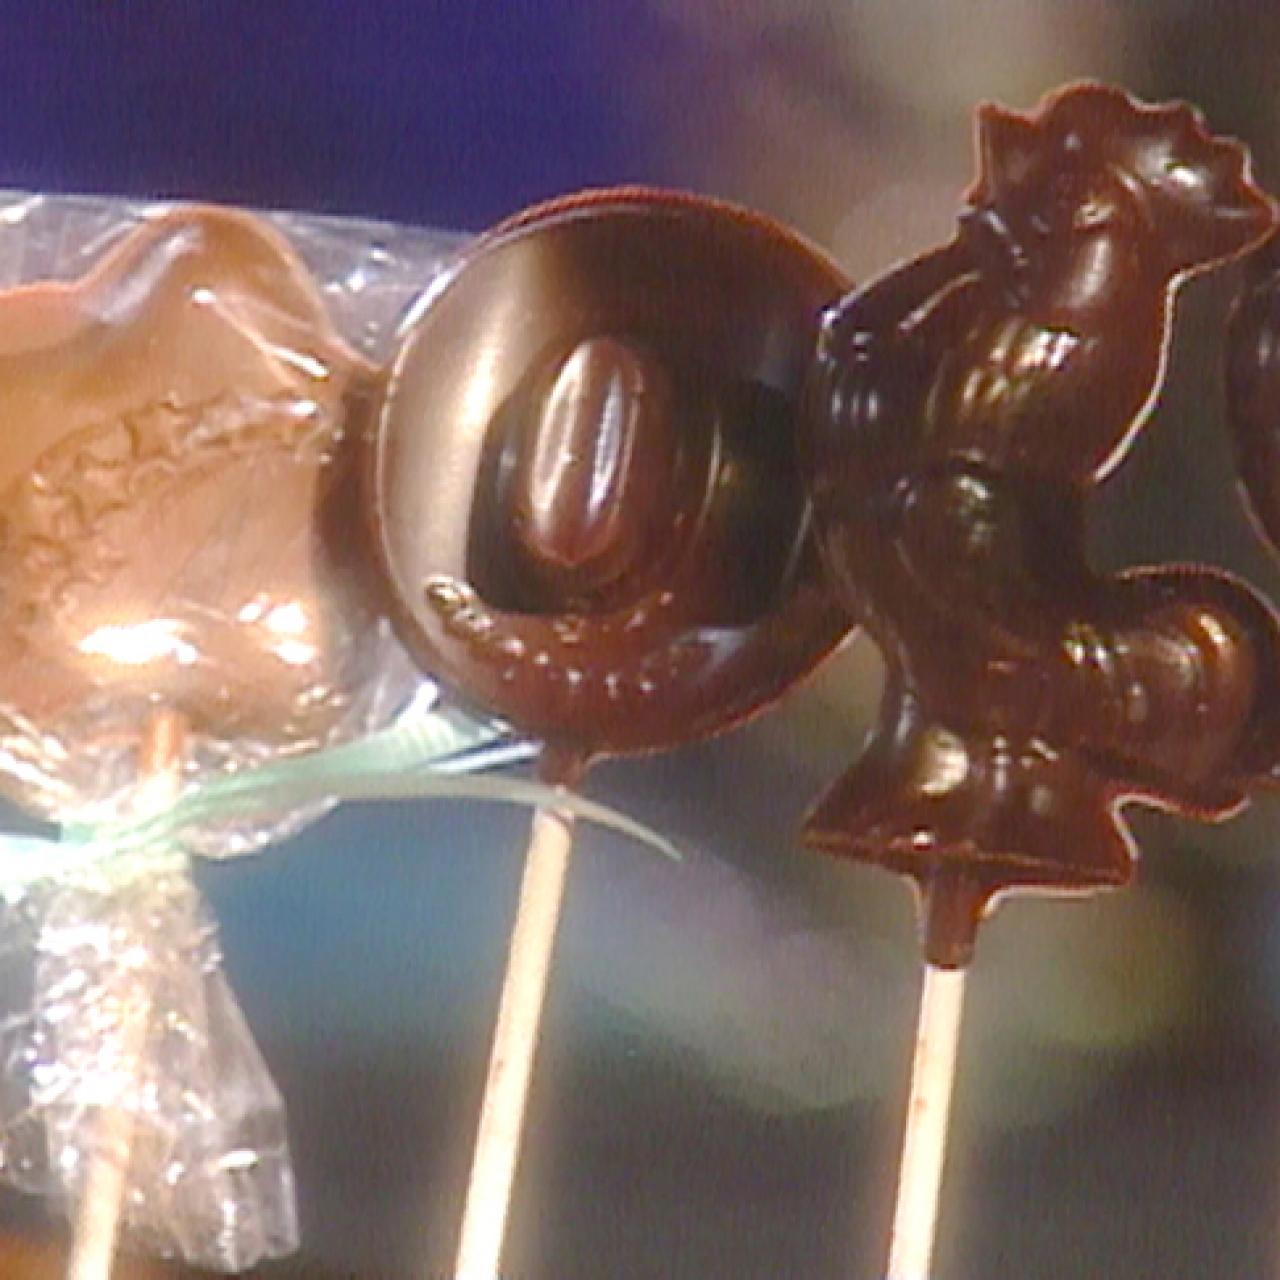 Sweet 16 Heart Pop Candy Mold - Confectionery House